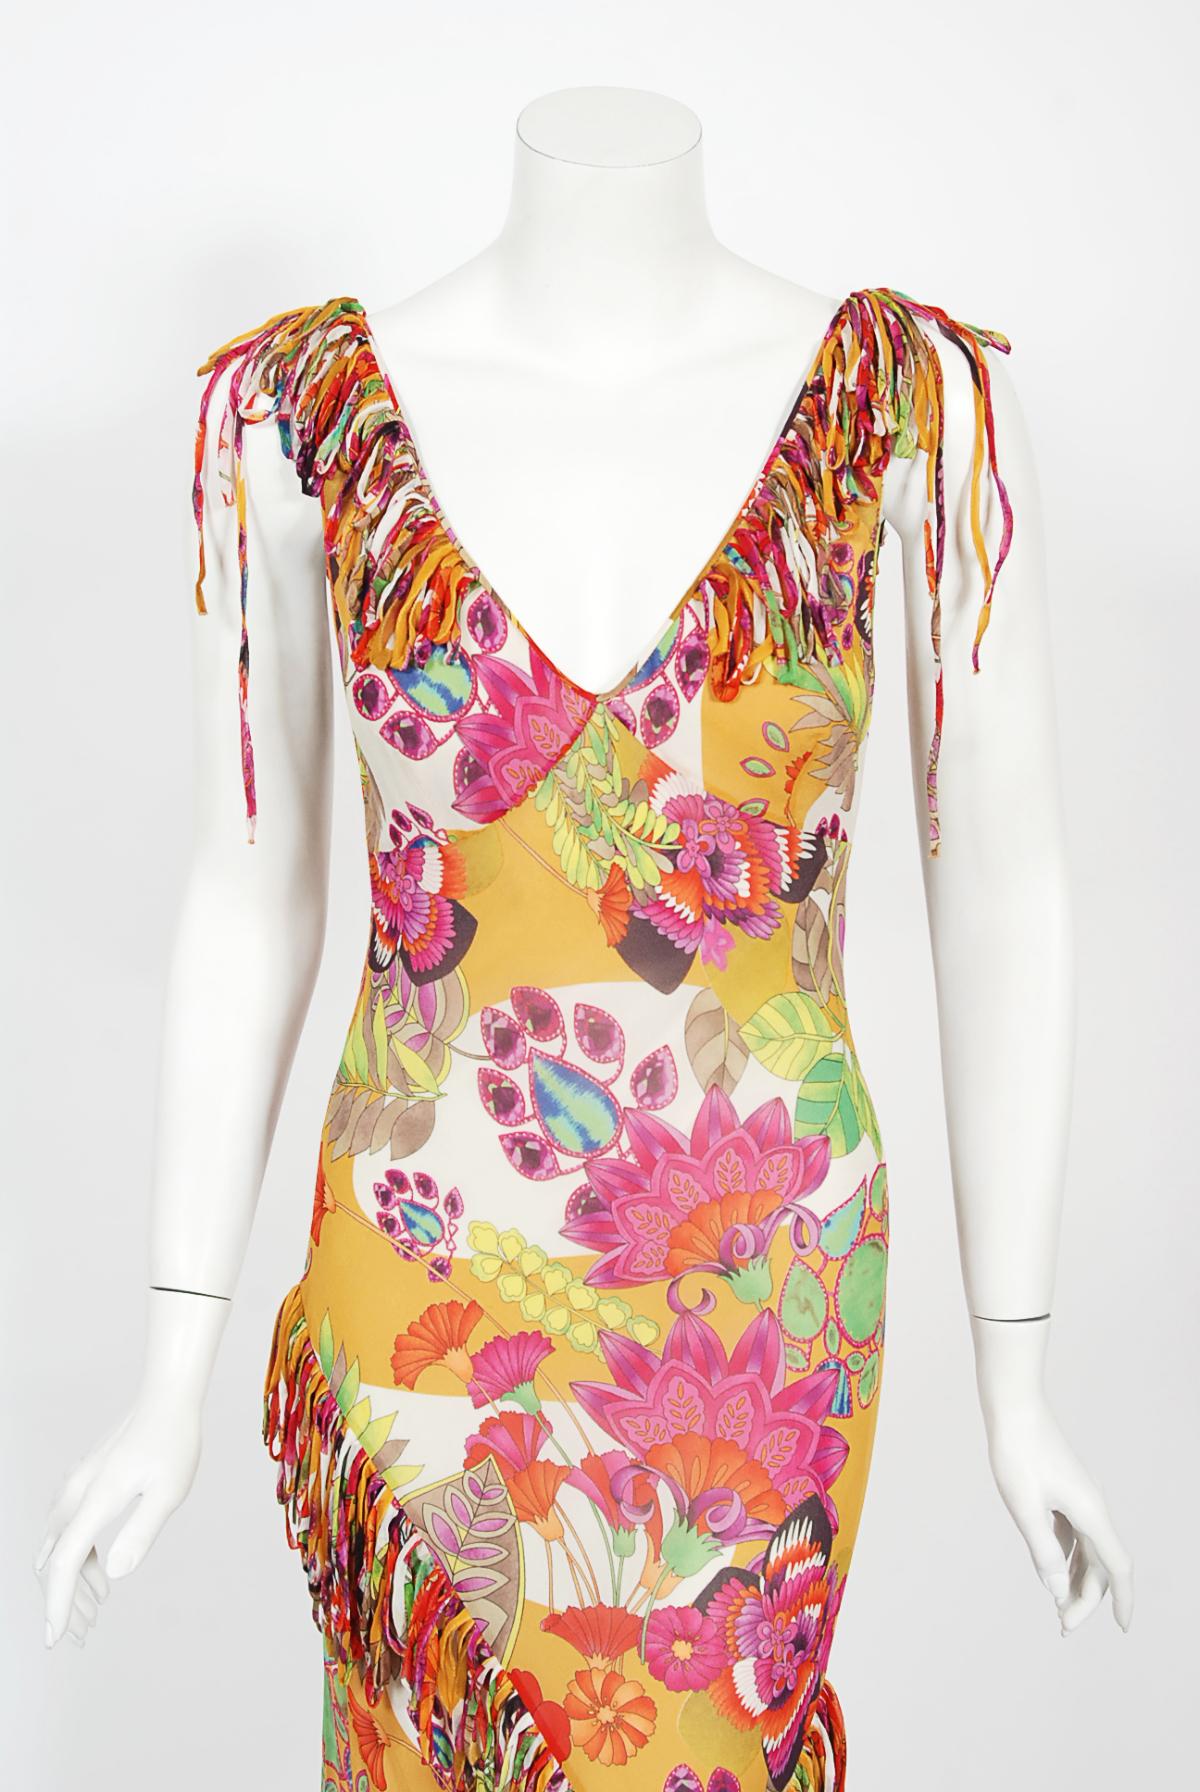 A simply stunning and highly coveted Christian Dior colorful psychedelic floral print silk bias-cut maxi dress. This rare Christian Dior treasure from John Galliano's impressive 2005 spring-summer collection is a perfect example of his genius. John